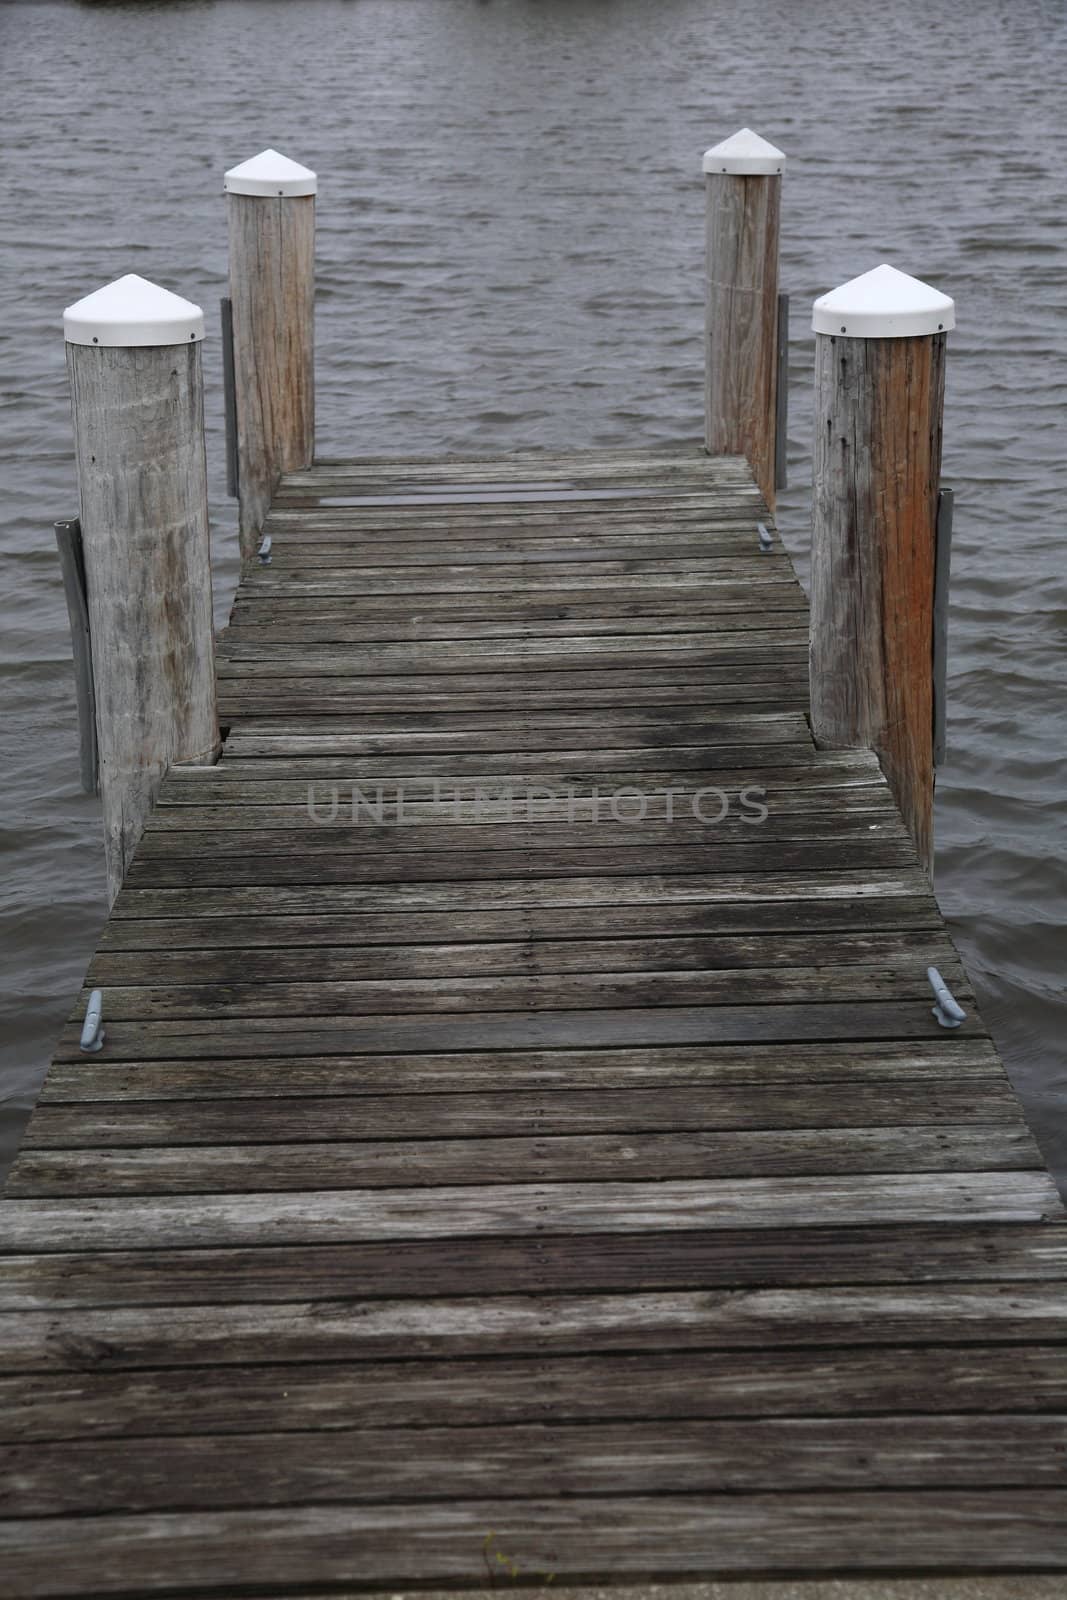 Wooden dock extends into a lake